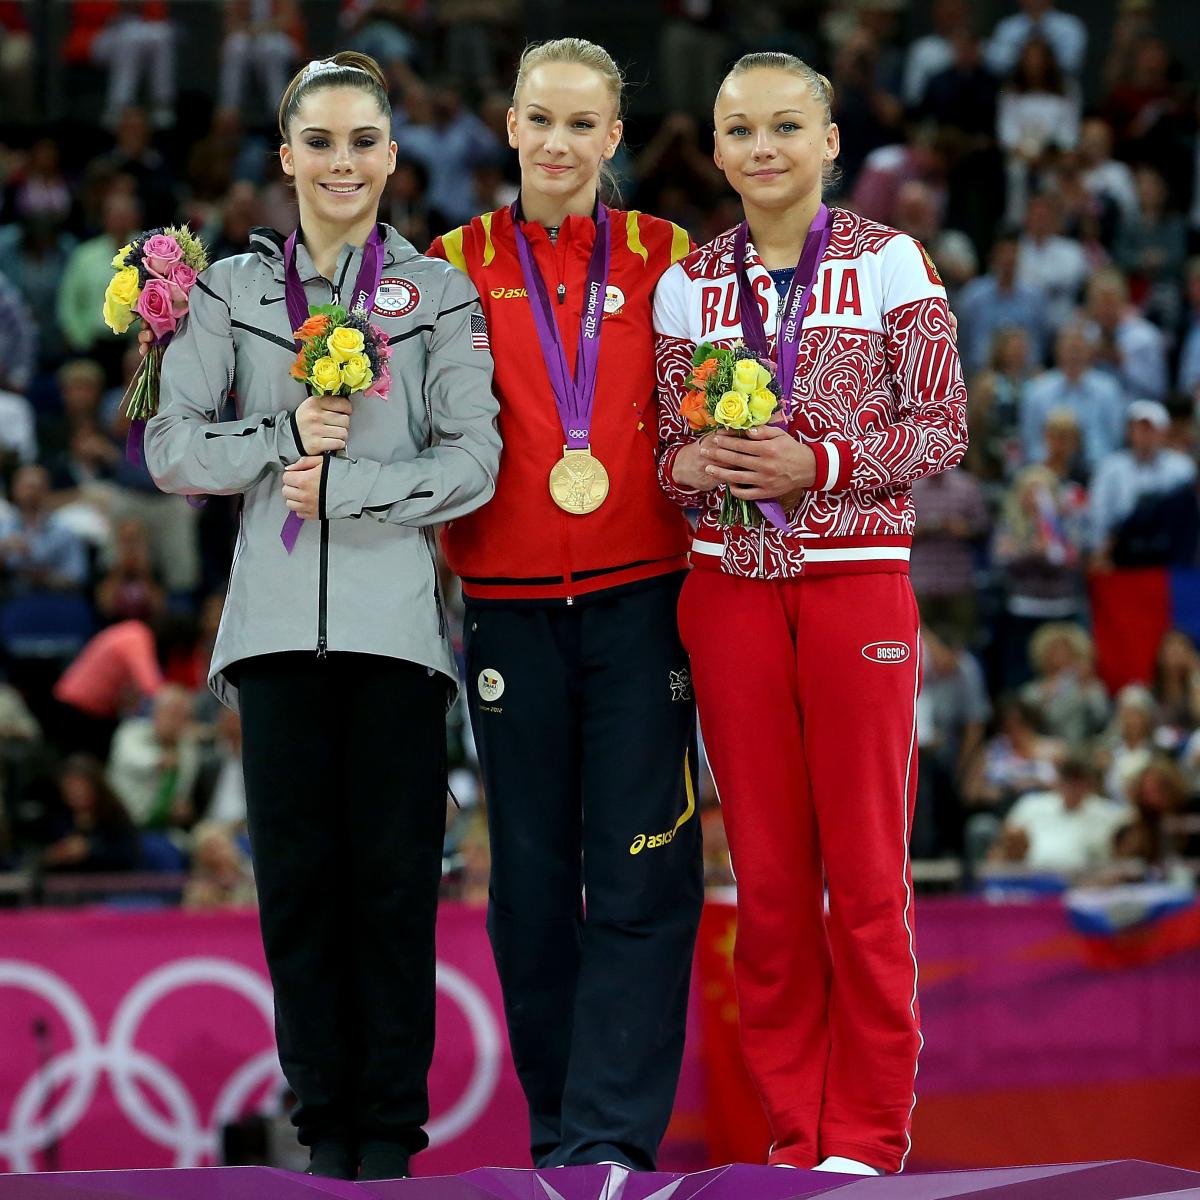 Olympic Womens Gymnastics 2012 Results Day 7 Scores Medalists And Standings News Scores 